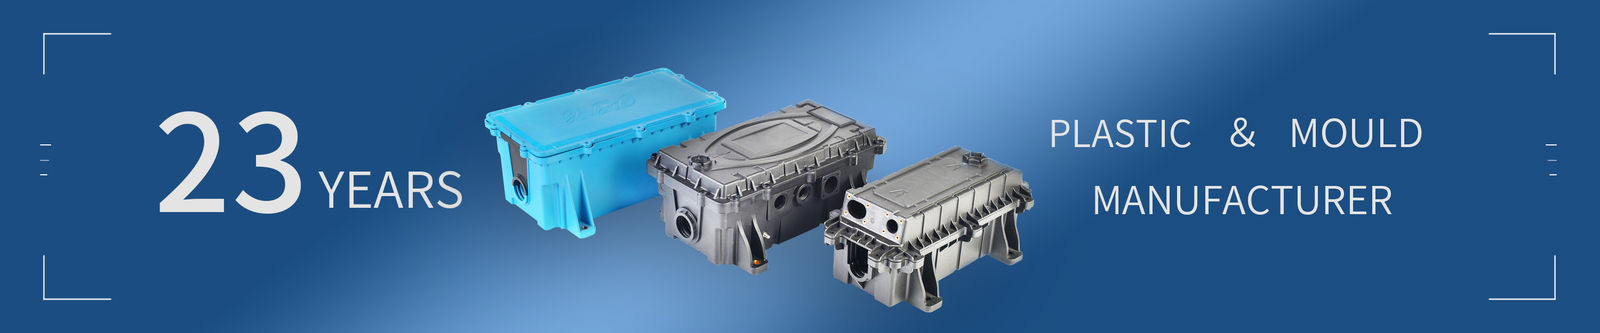 ABS Plastic Injection Molding